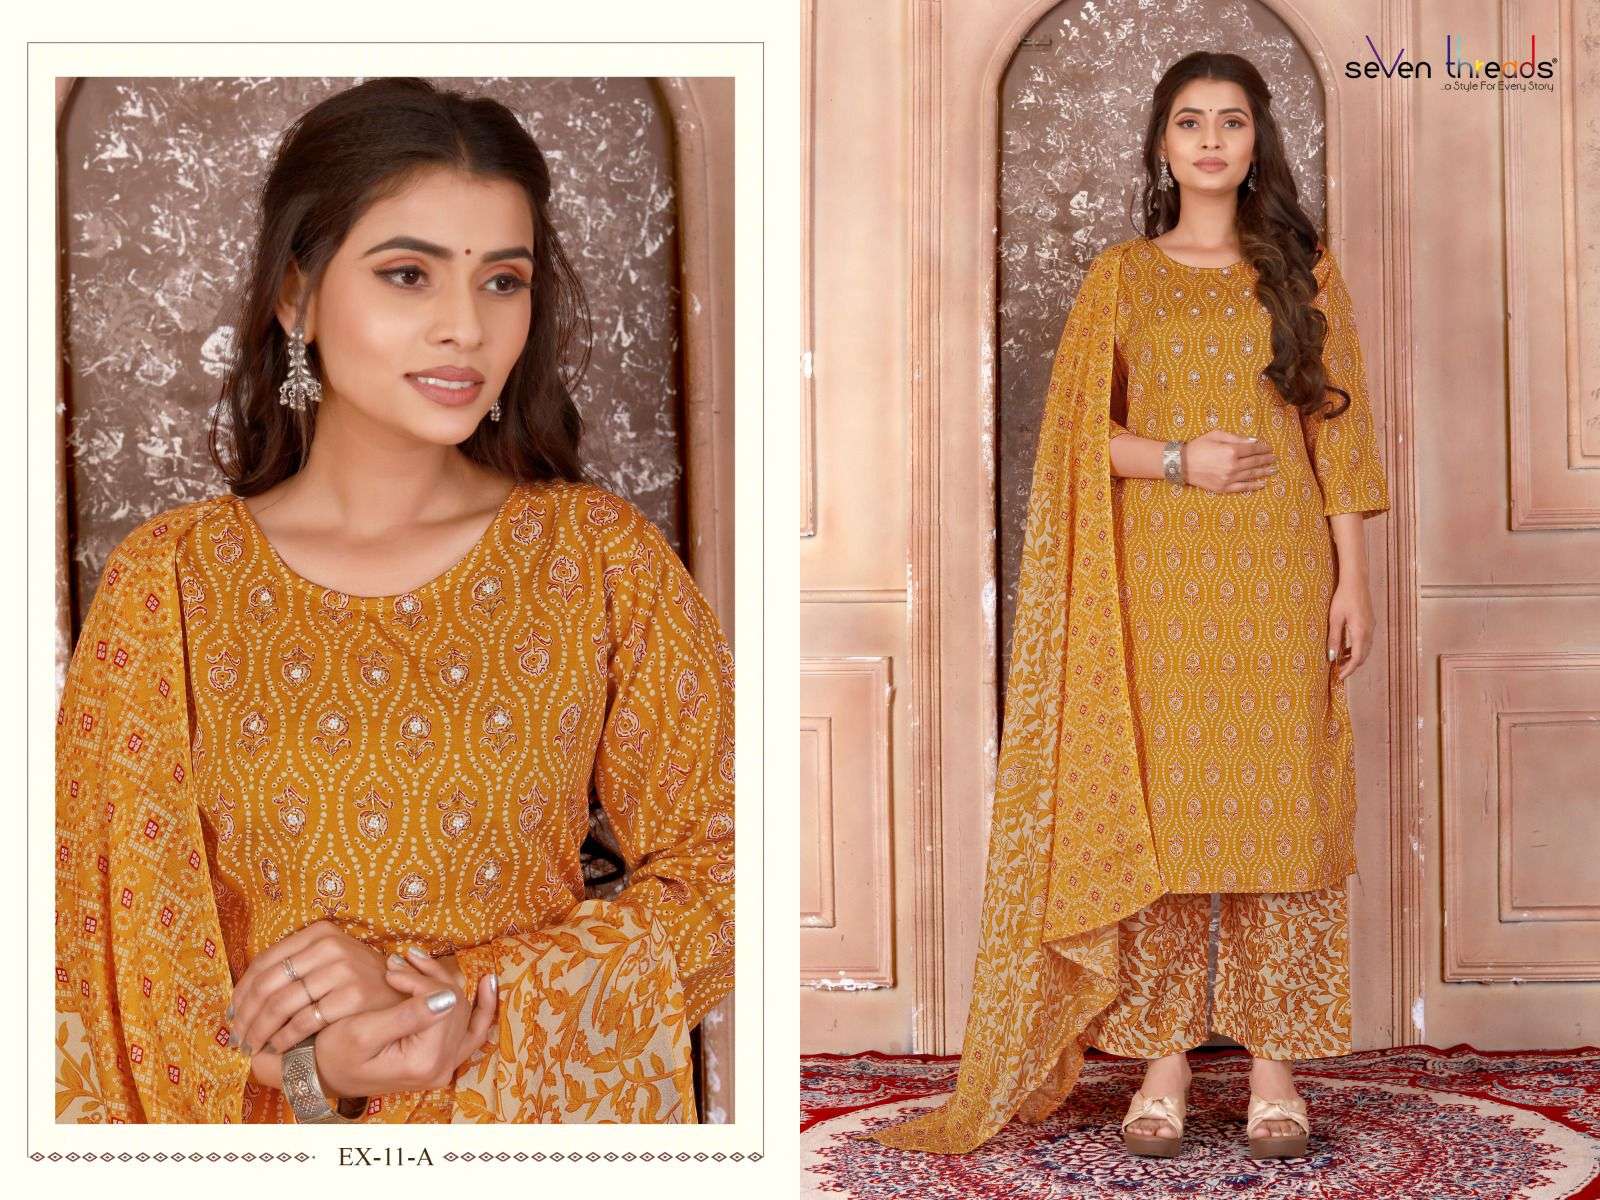 Ex Vol-11 By Seven Threads 11-A To 11-D Series Beautiful Suits Colorful Stylish Fancy Casual Wear & Ethnic Wear Cotton Print Dresses At Wholesale Price